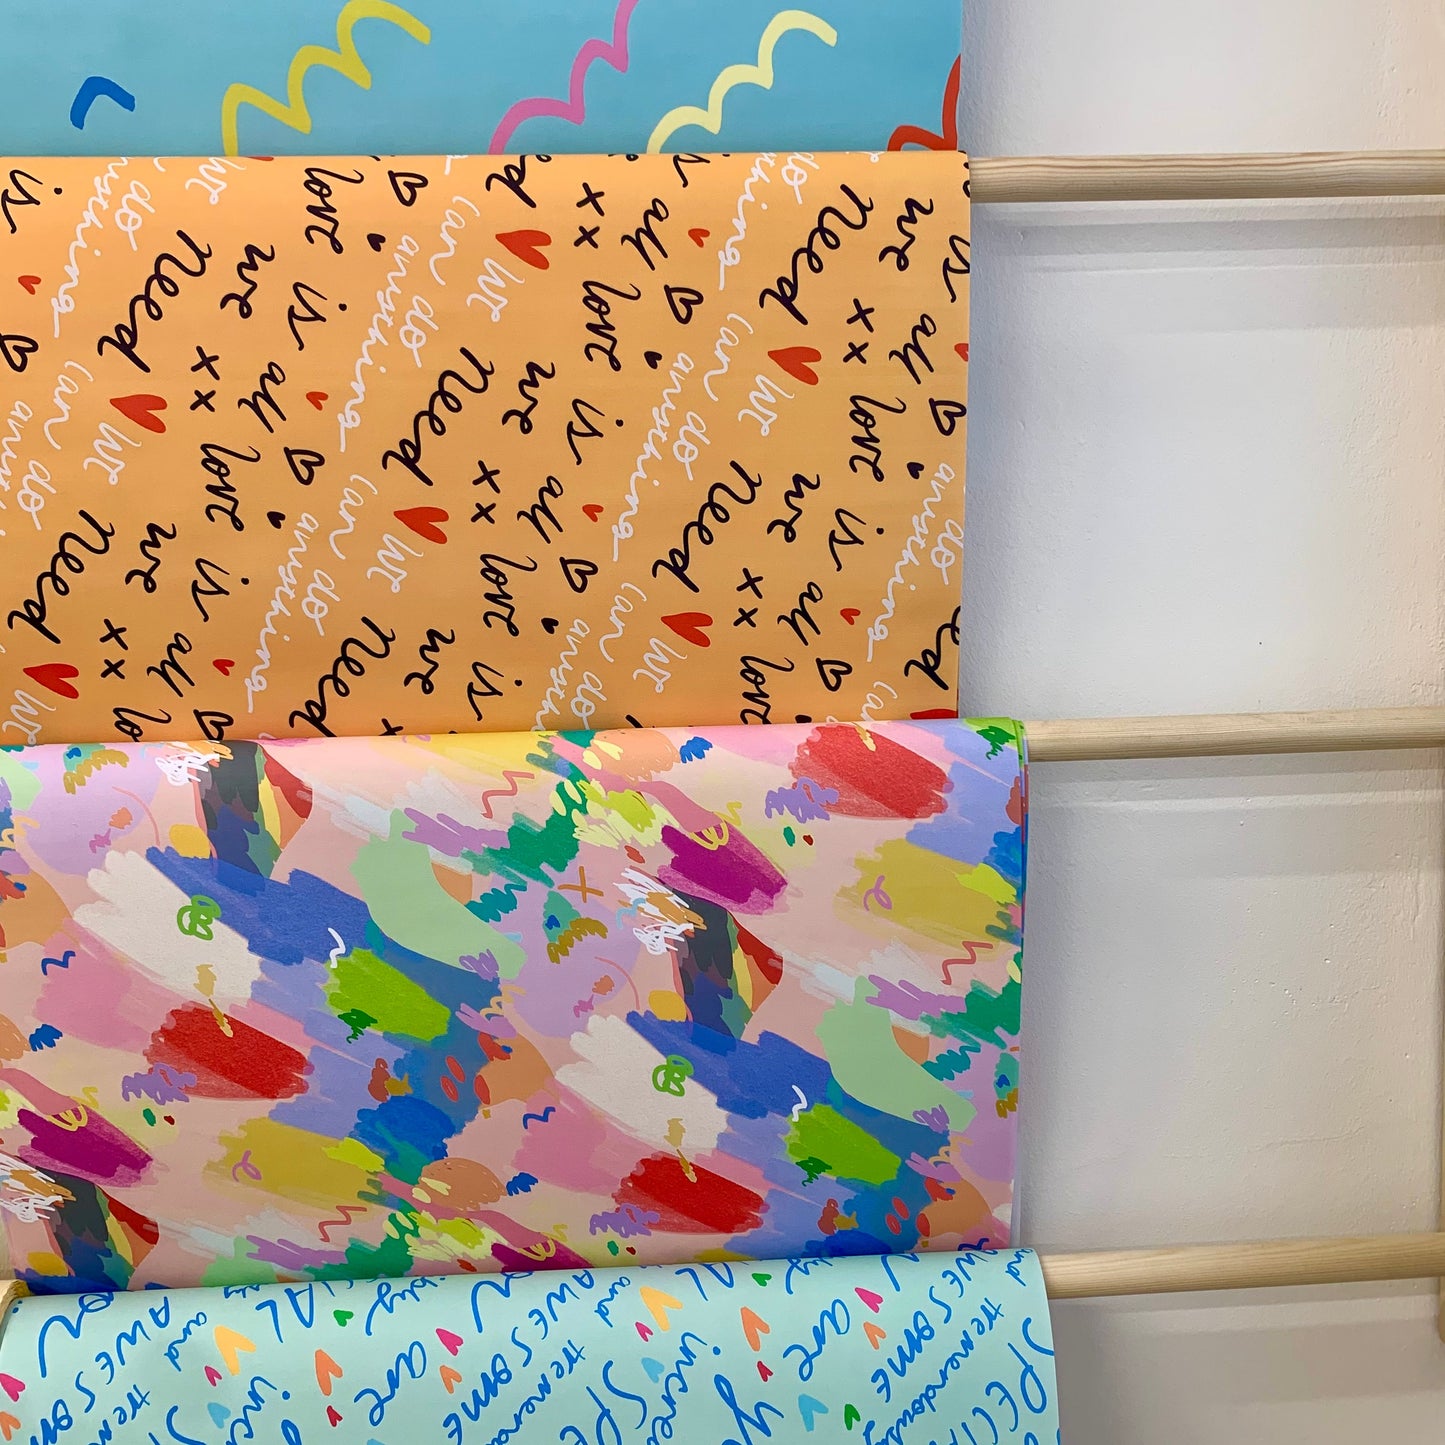 Giftwrap designed by Nicola Rowlands